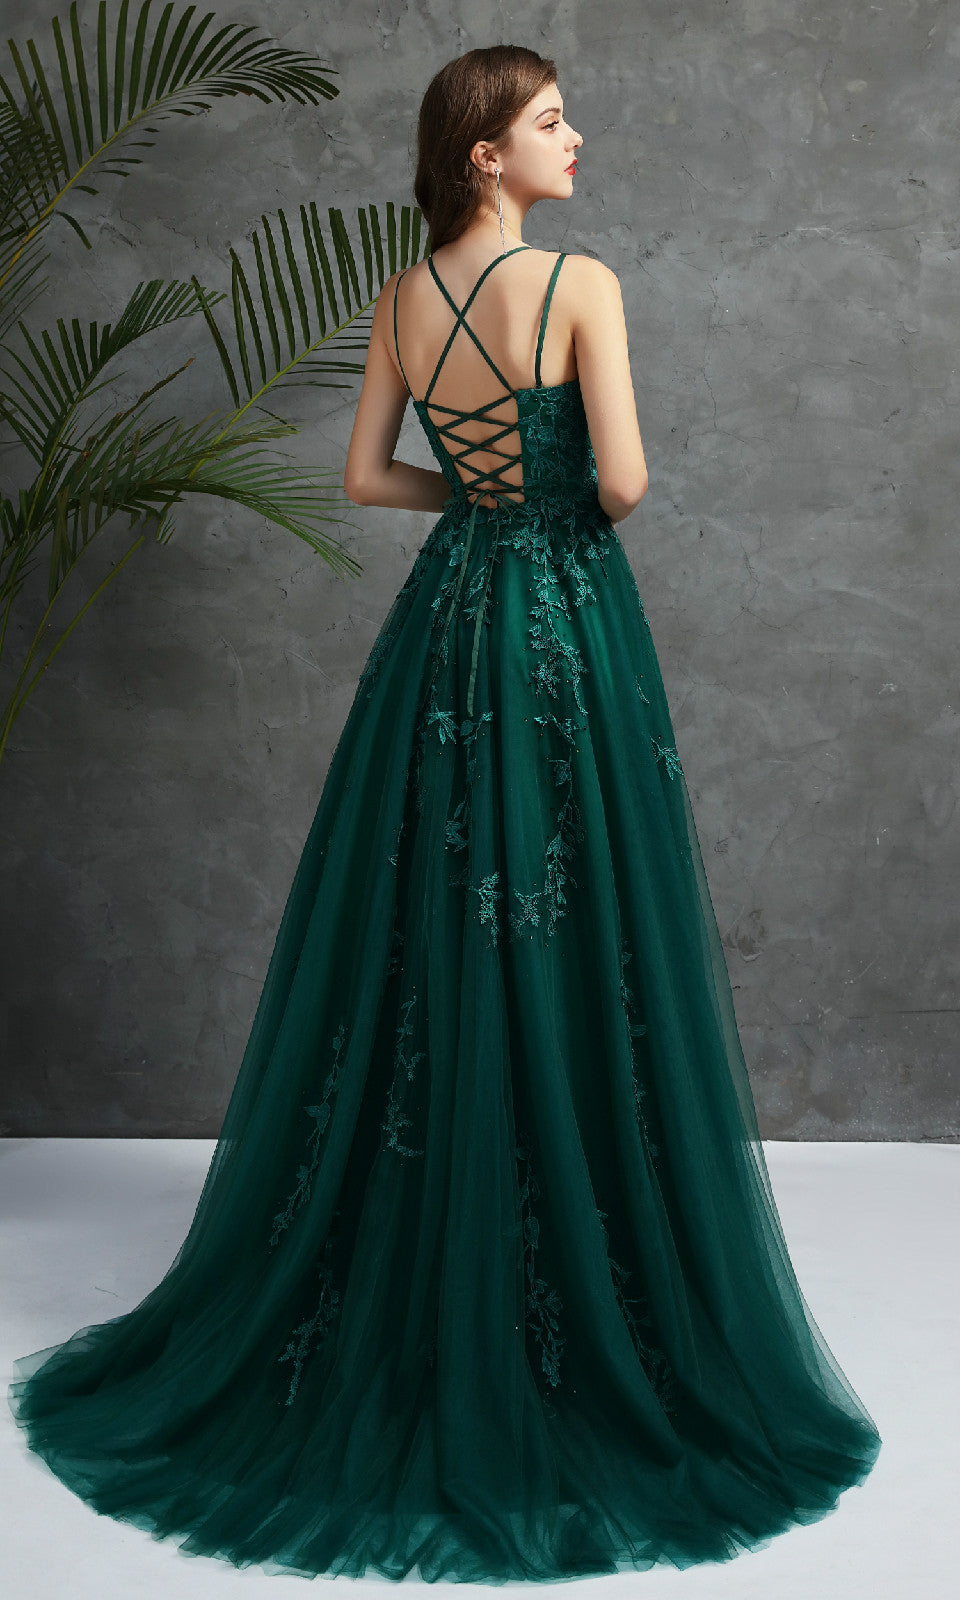 Lace Appliques Prom Dresses Long Sleeveless Custom Formal Evening Party Gowns ER2070